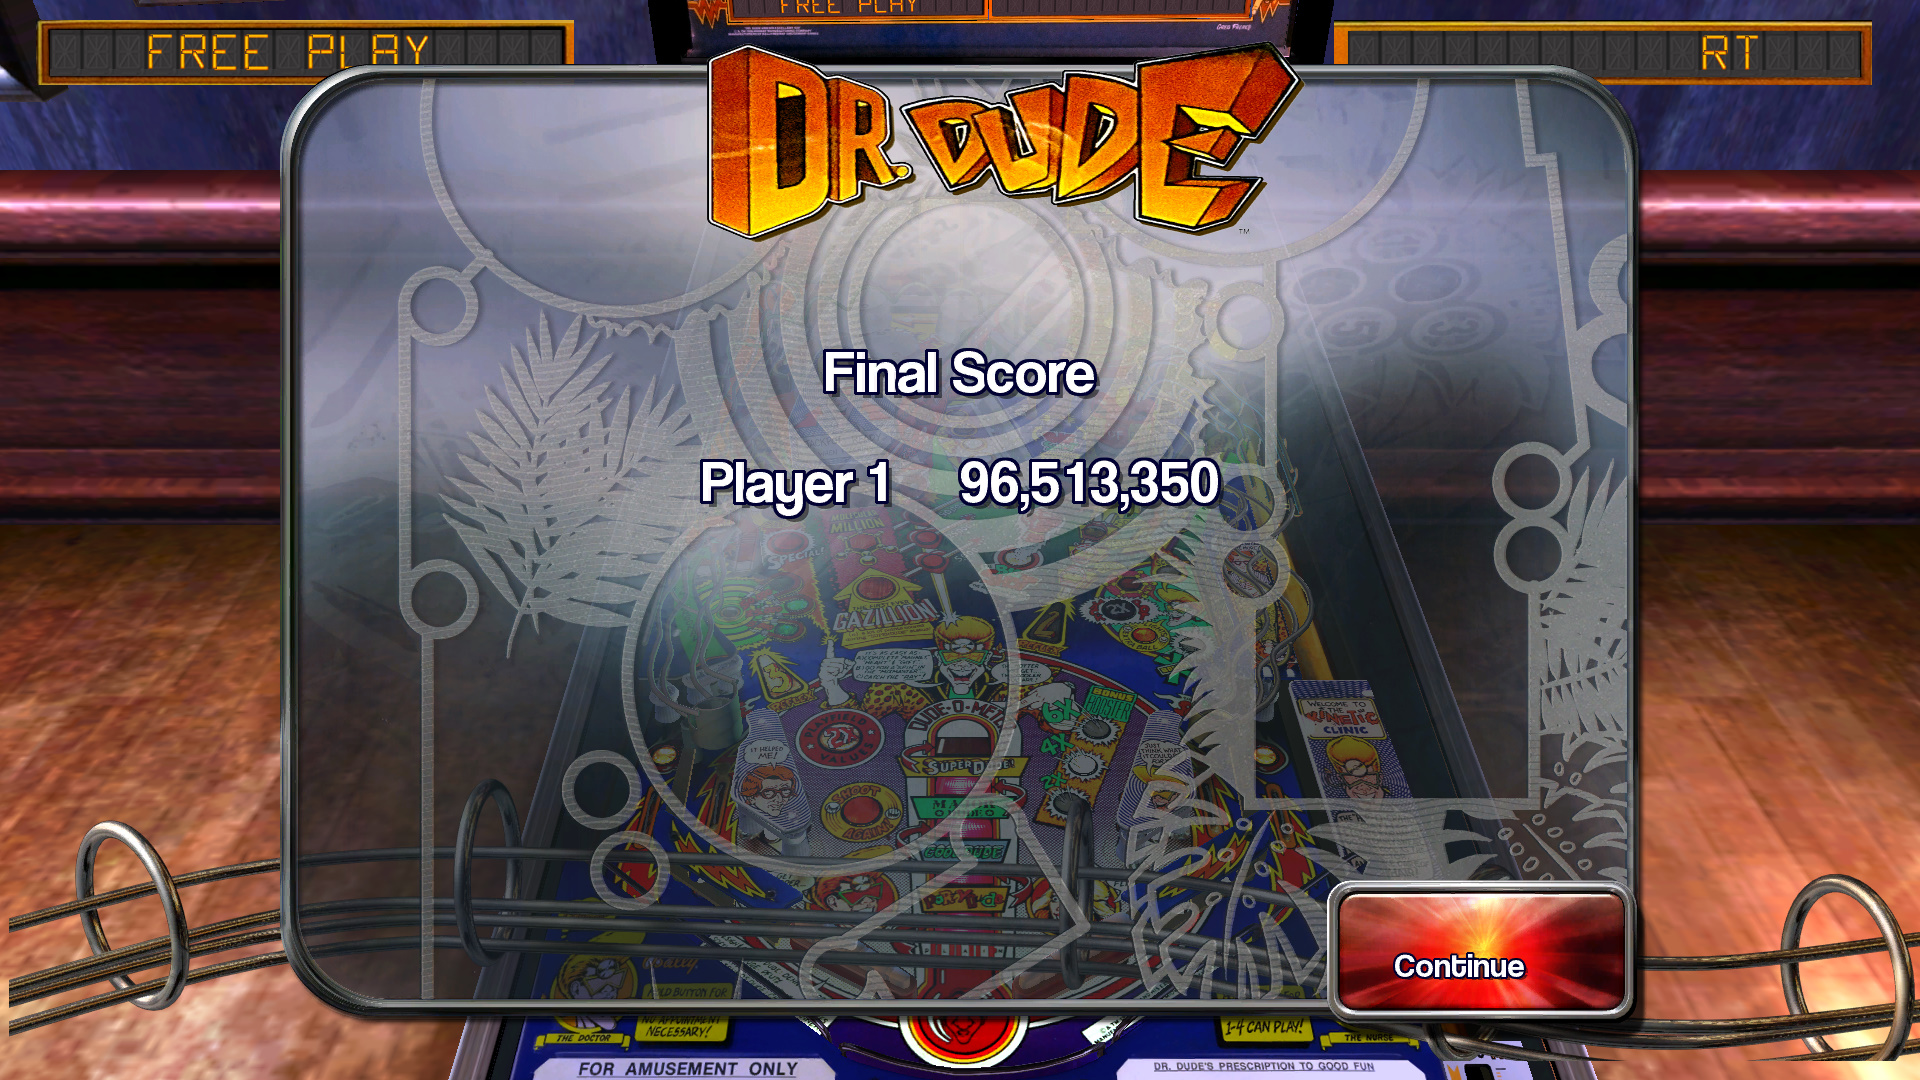 TheTrickster: Pinball Arcade: Dr. Dude (PC) 96,513,350 points on 2015-10-10 03:10:07